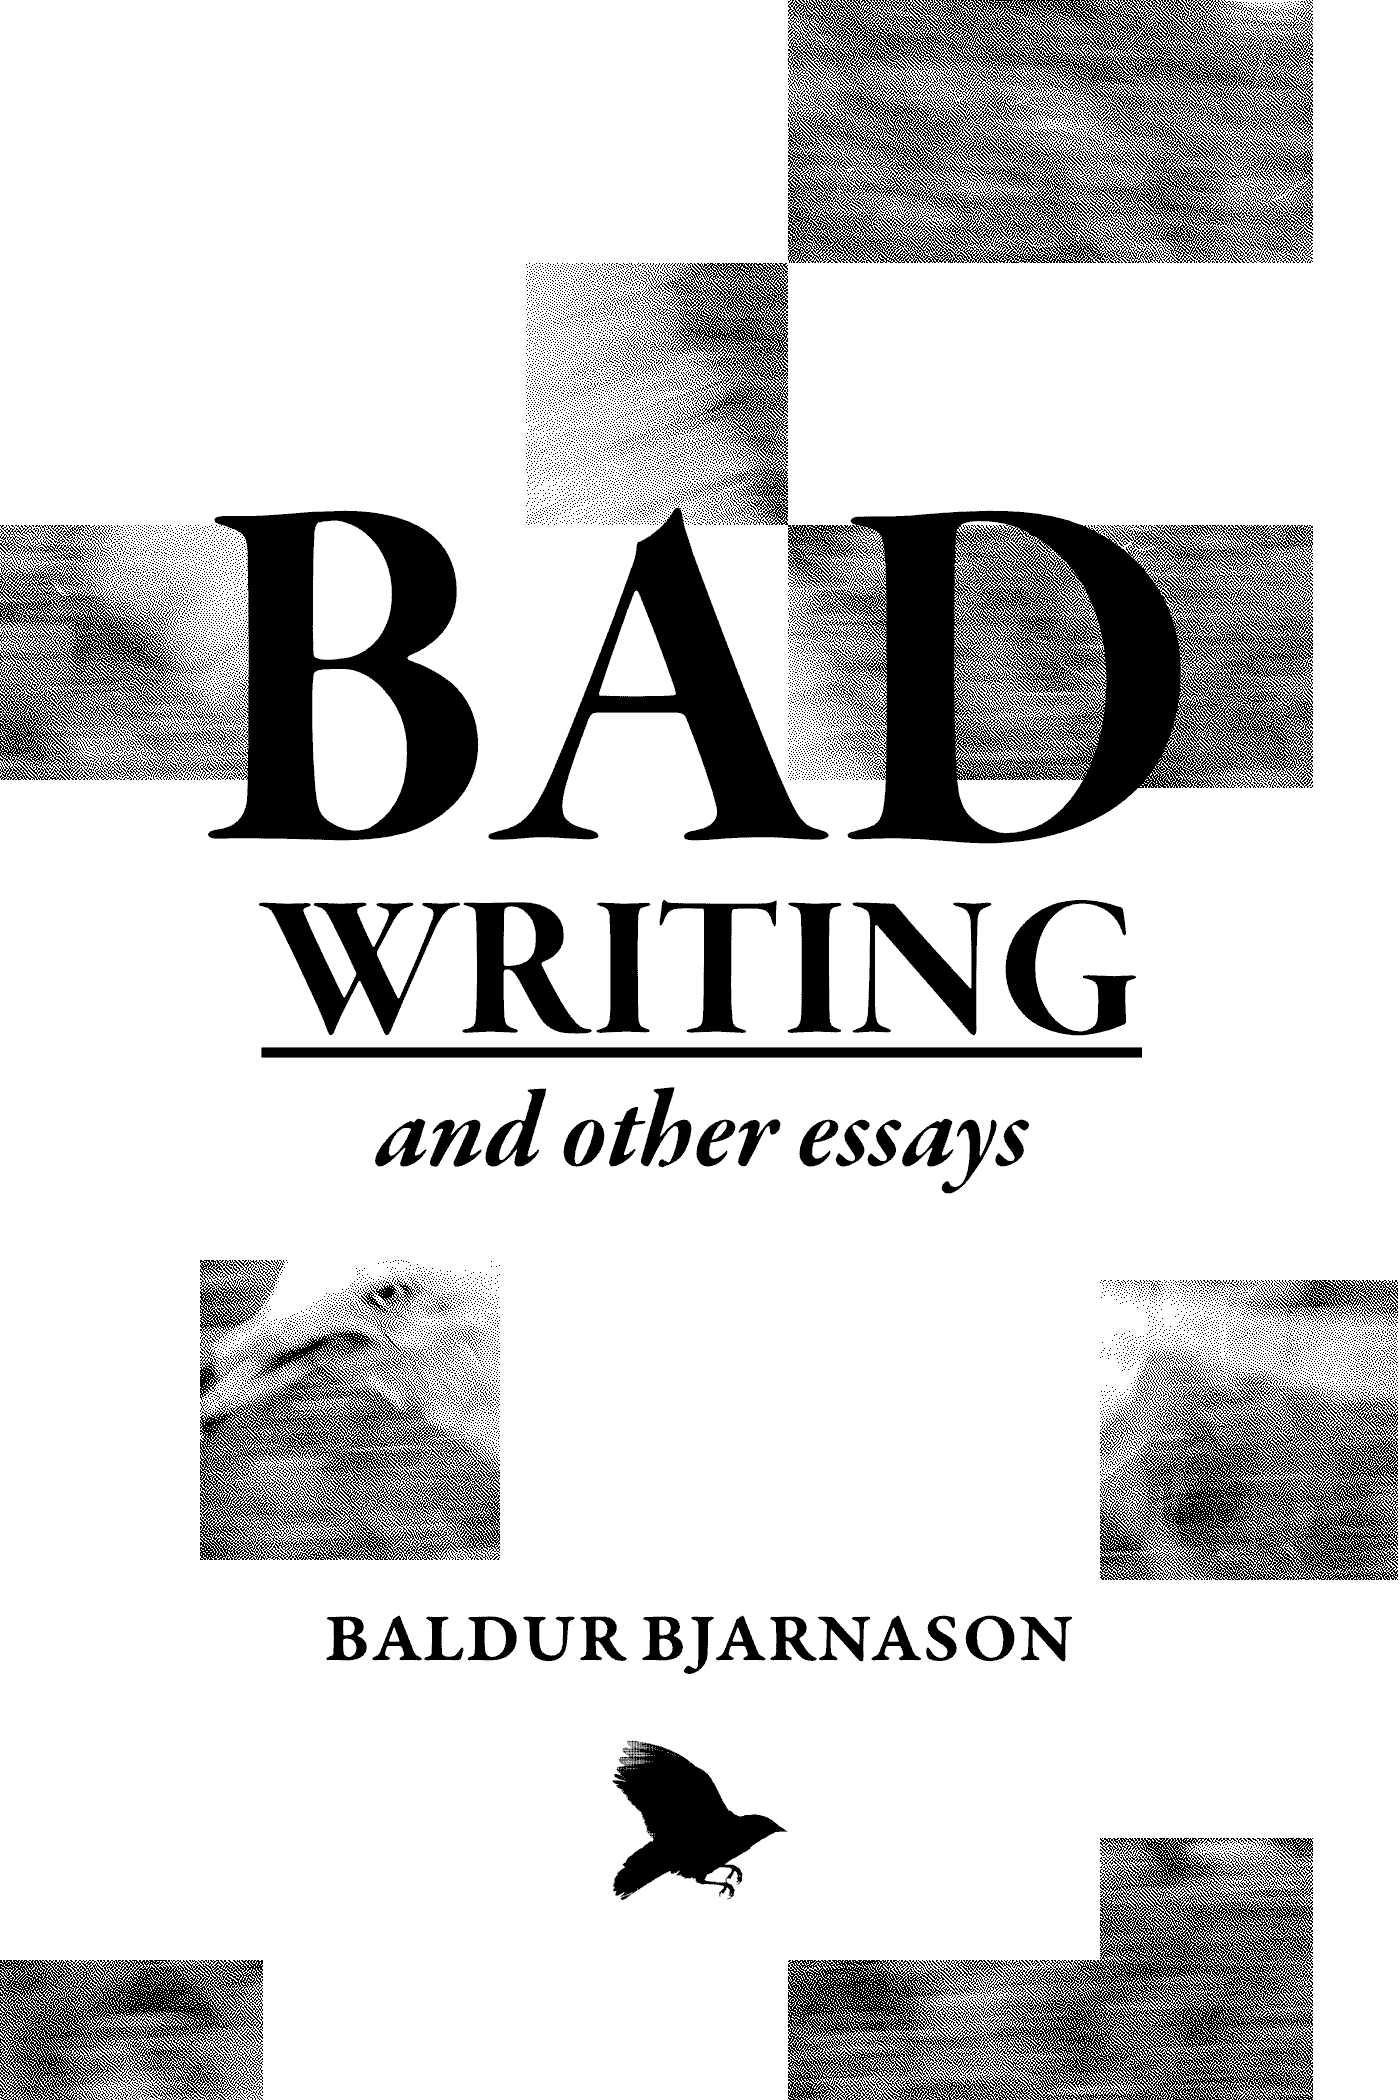 A book cover with a broken blocky image of a seagull as its primary illustration. The title is "Bad Writing and other essays". By Baldur Bjarnason